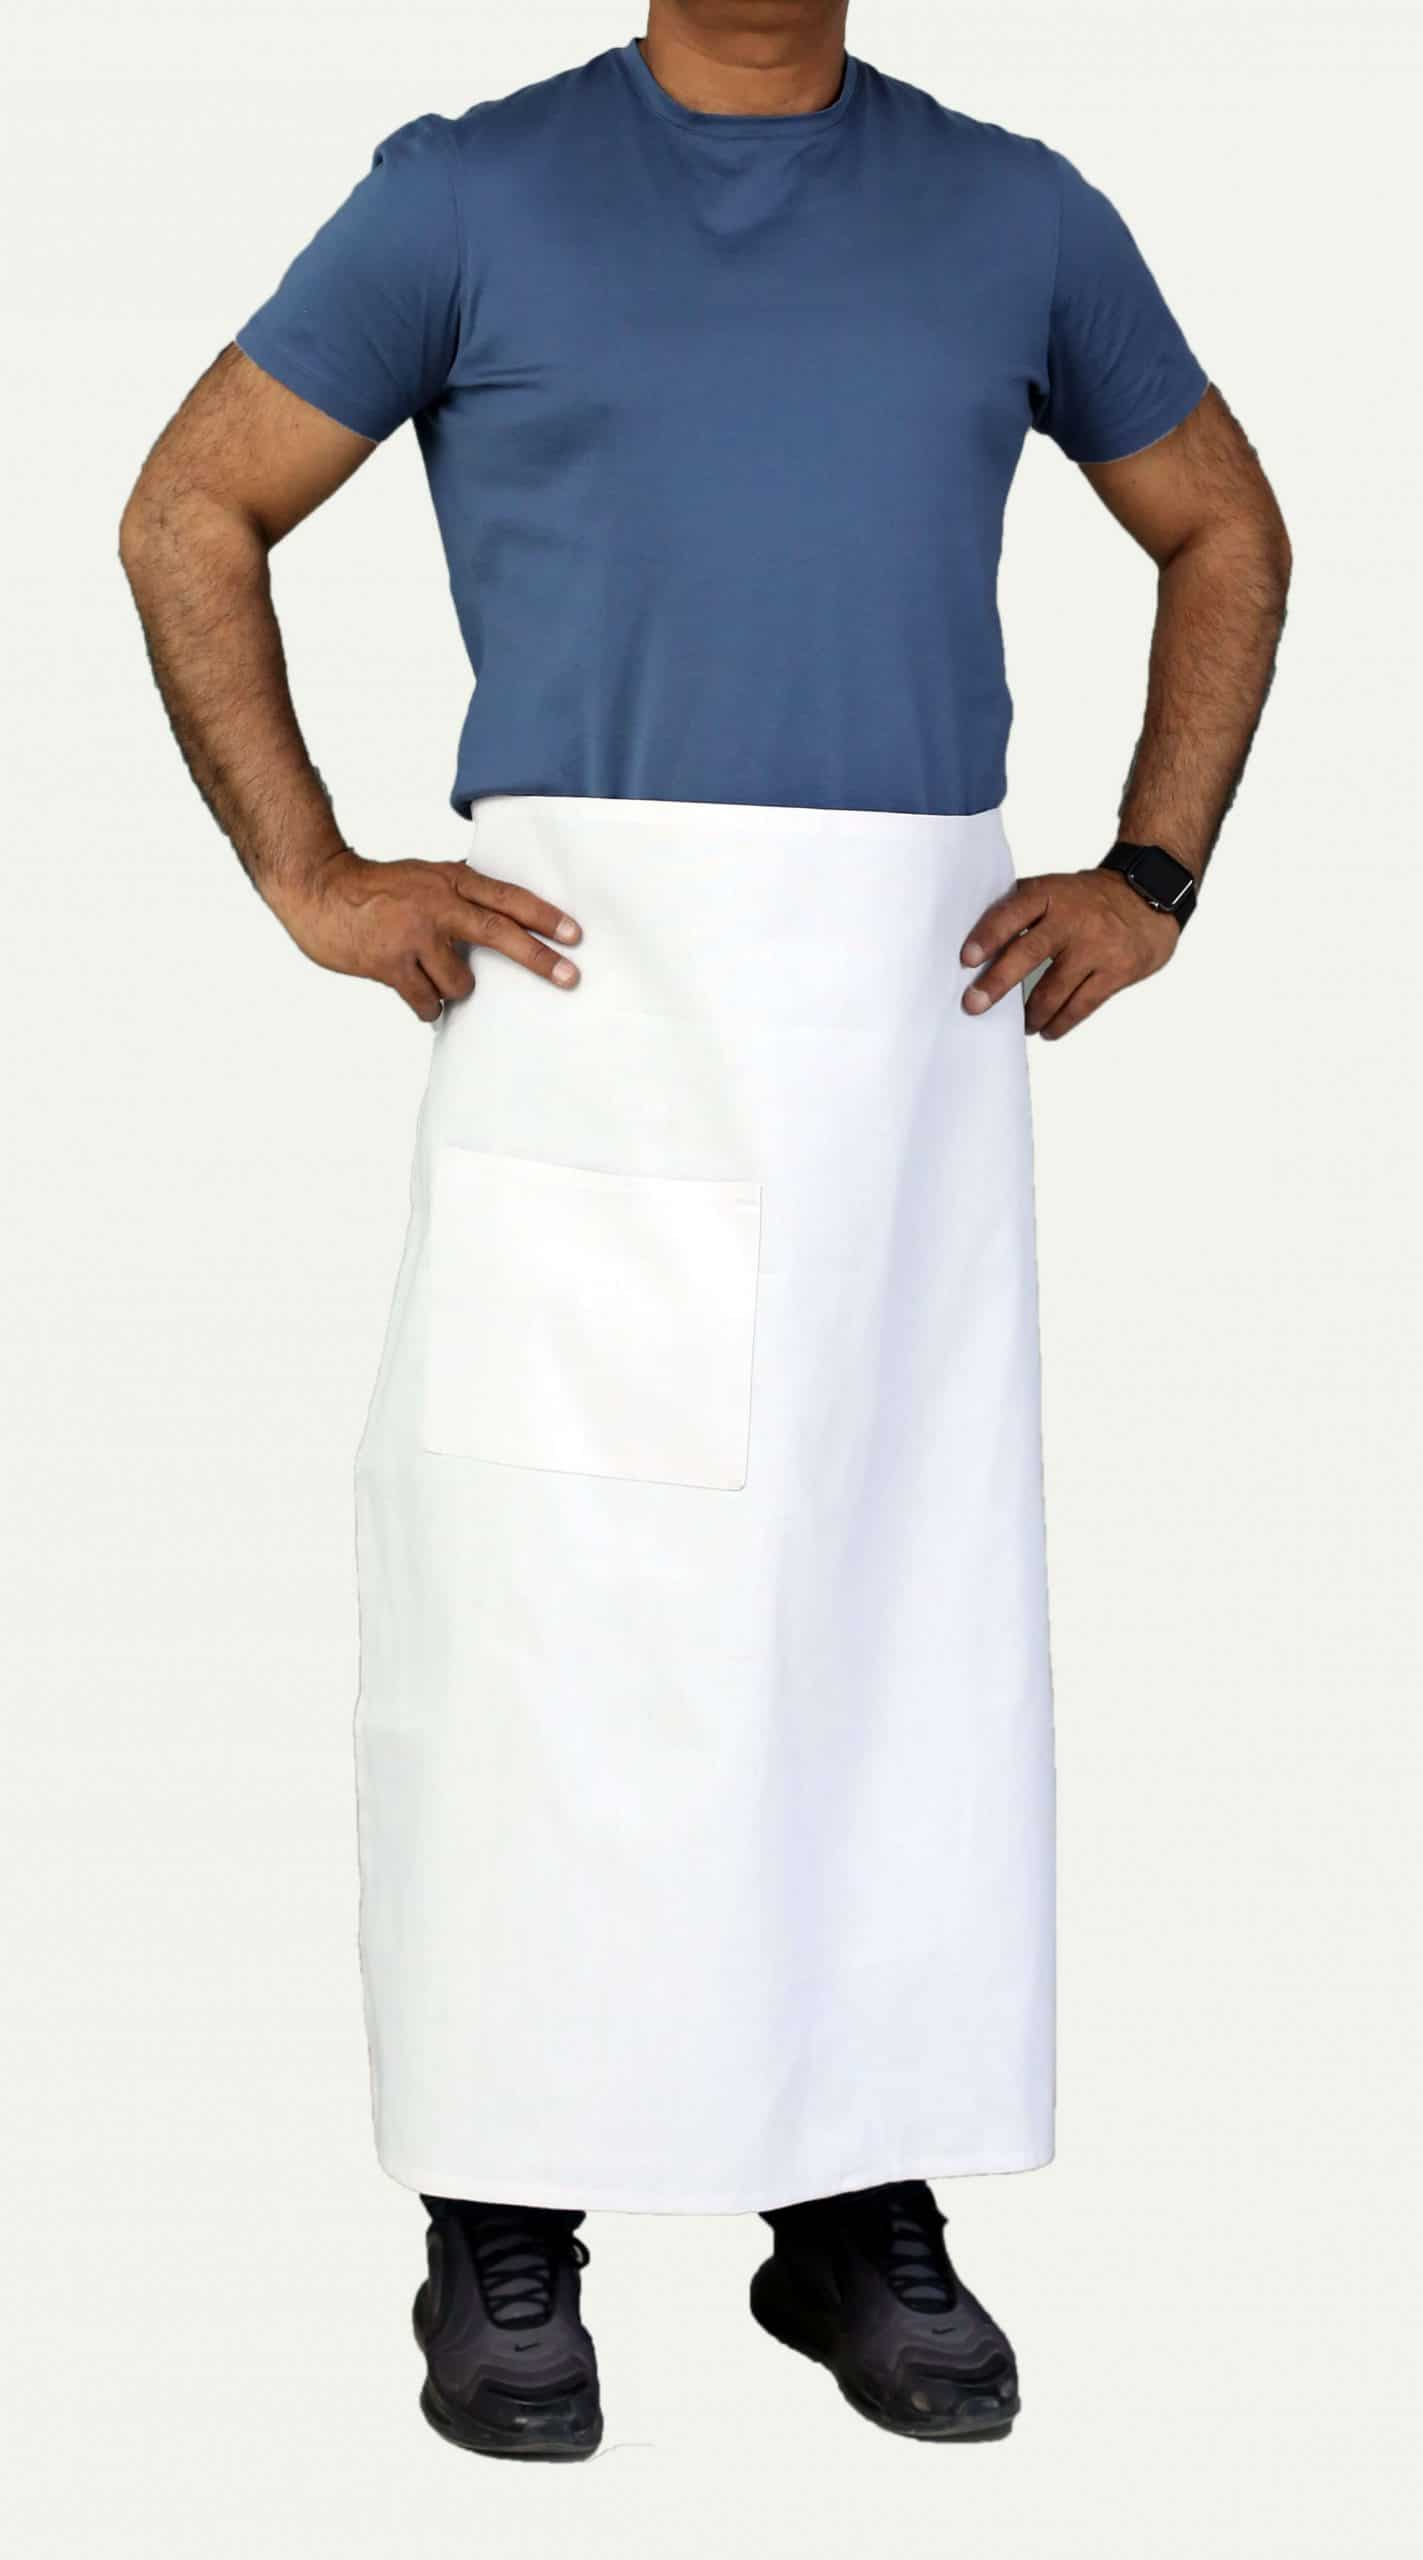 4 NEW WHITE Blanco BISTRO APRON 1 POCKET CHEF COMMERCIAL QUALITY Super Nice 